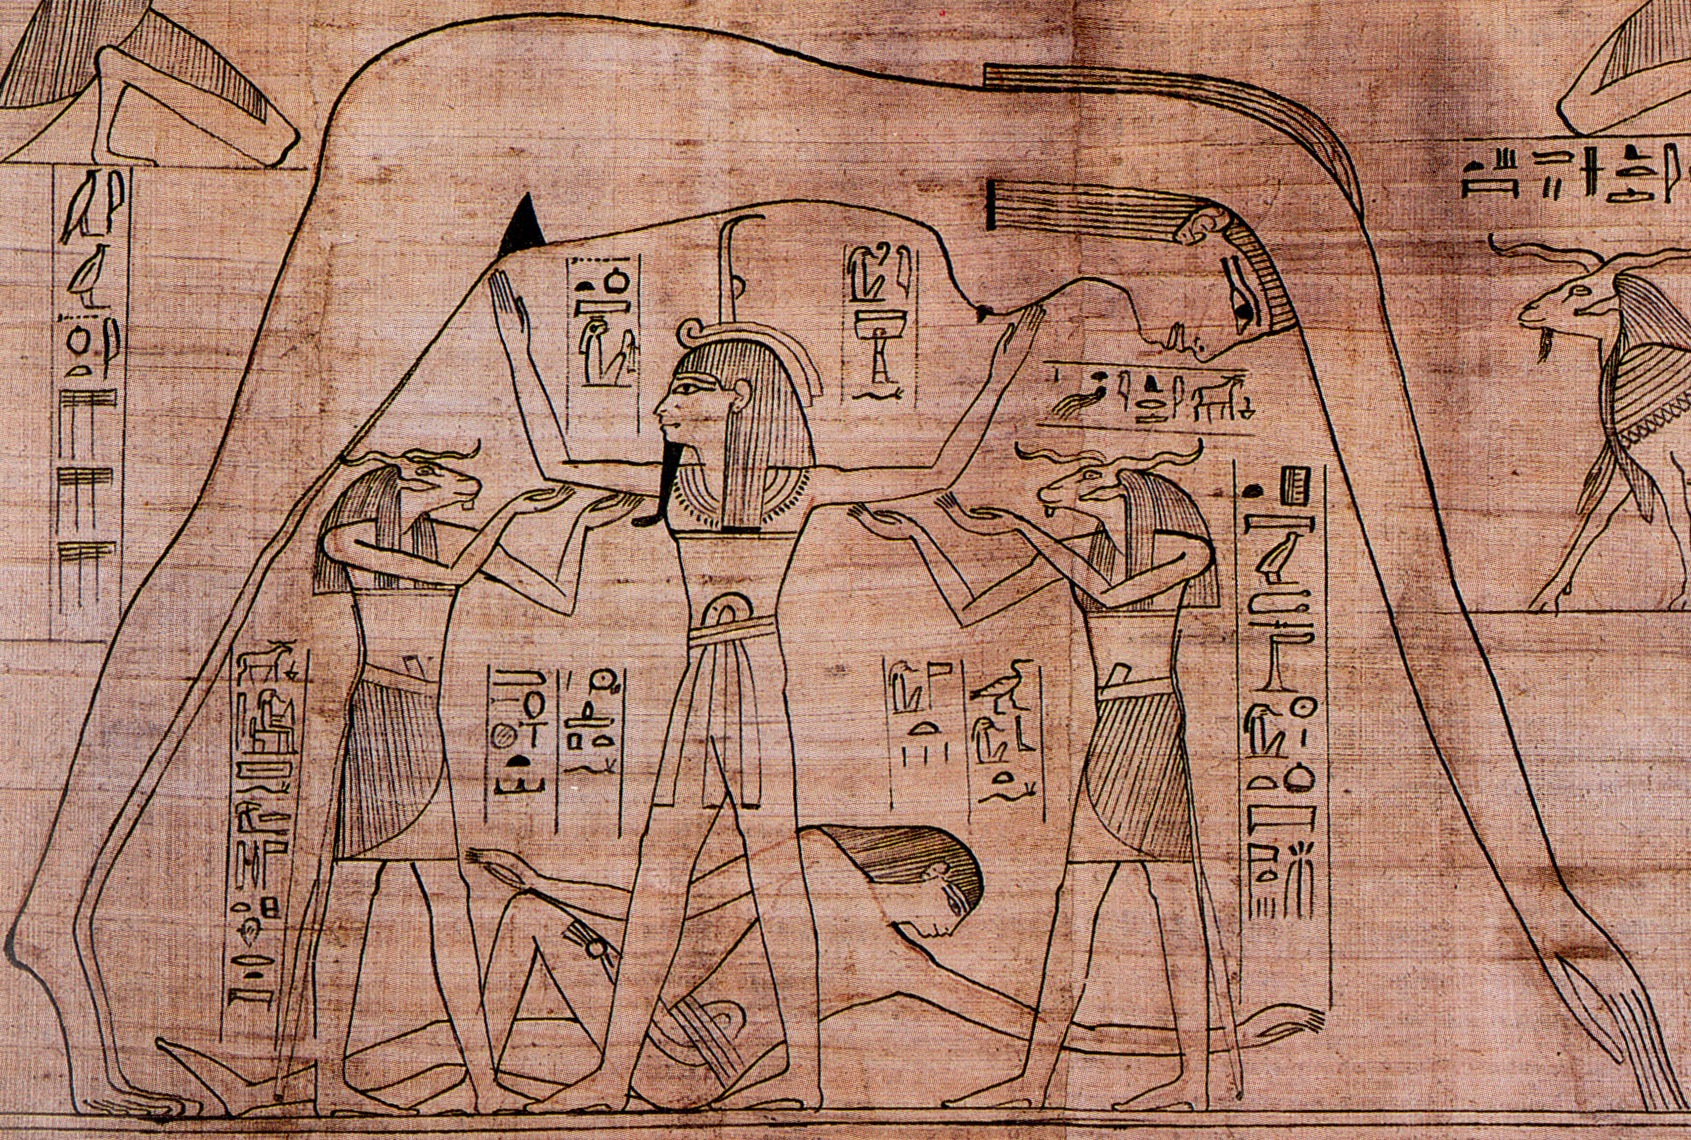 An Egyptian piece of art depicted on papyrus. The art shows three figures standing and one laying down. Nut, the Goddess of sky arched over them.